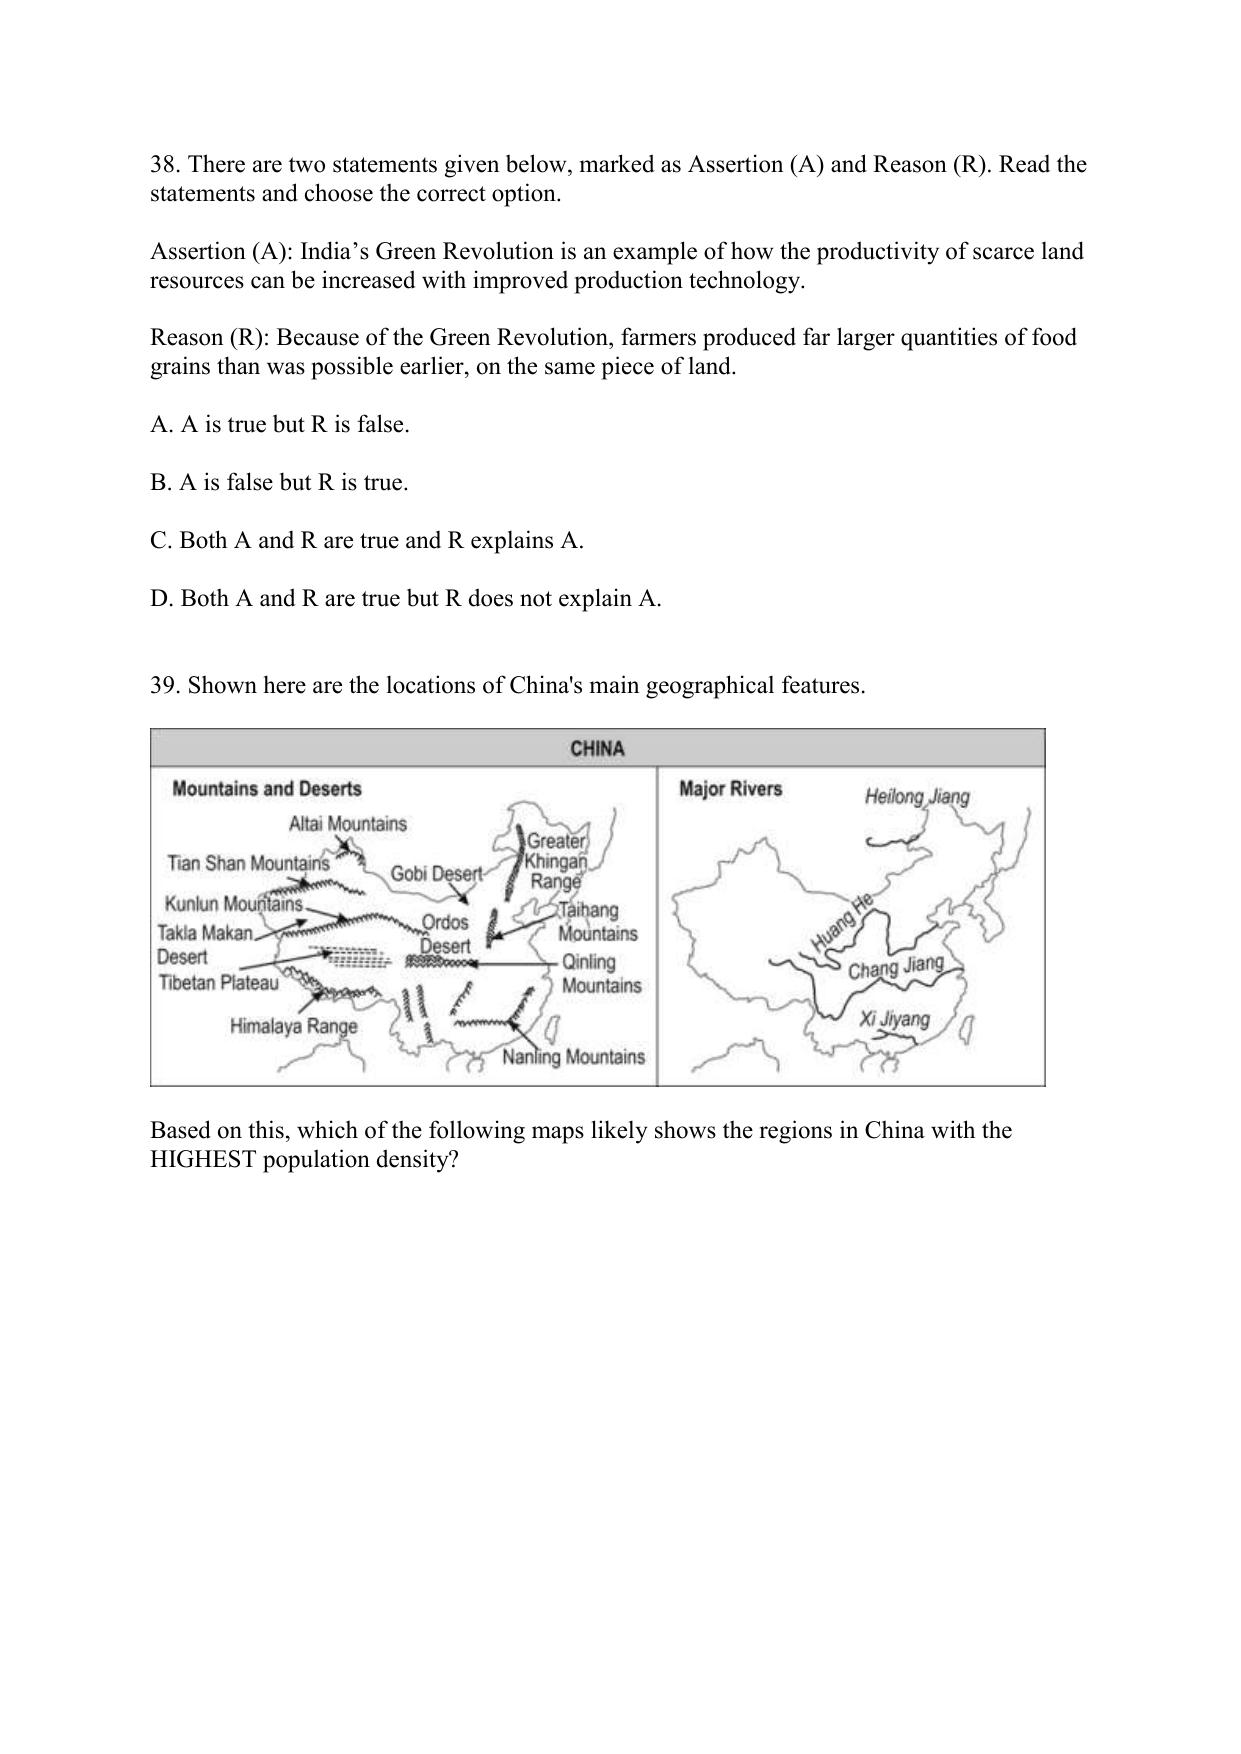 CBSE Class 12 Geography Term 1 Practice Questions 2021-22 - Page 13